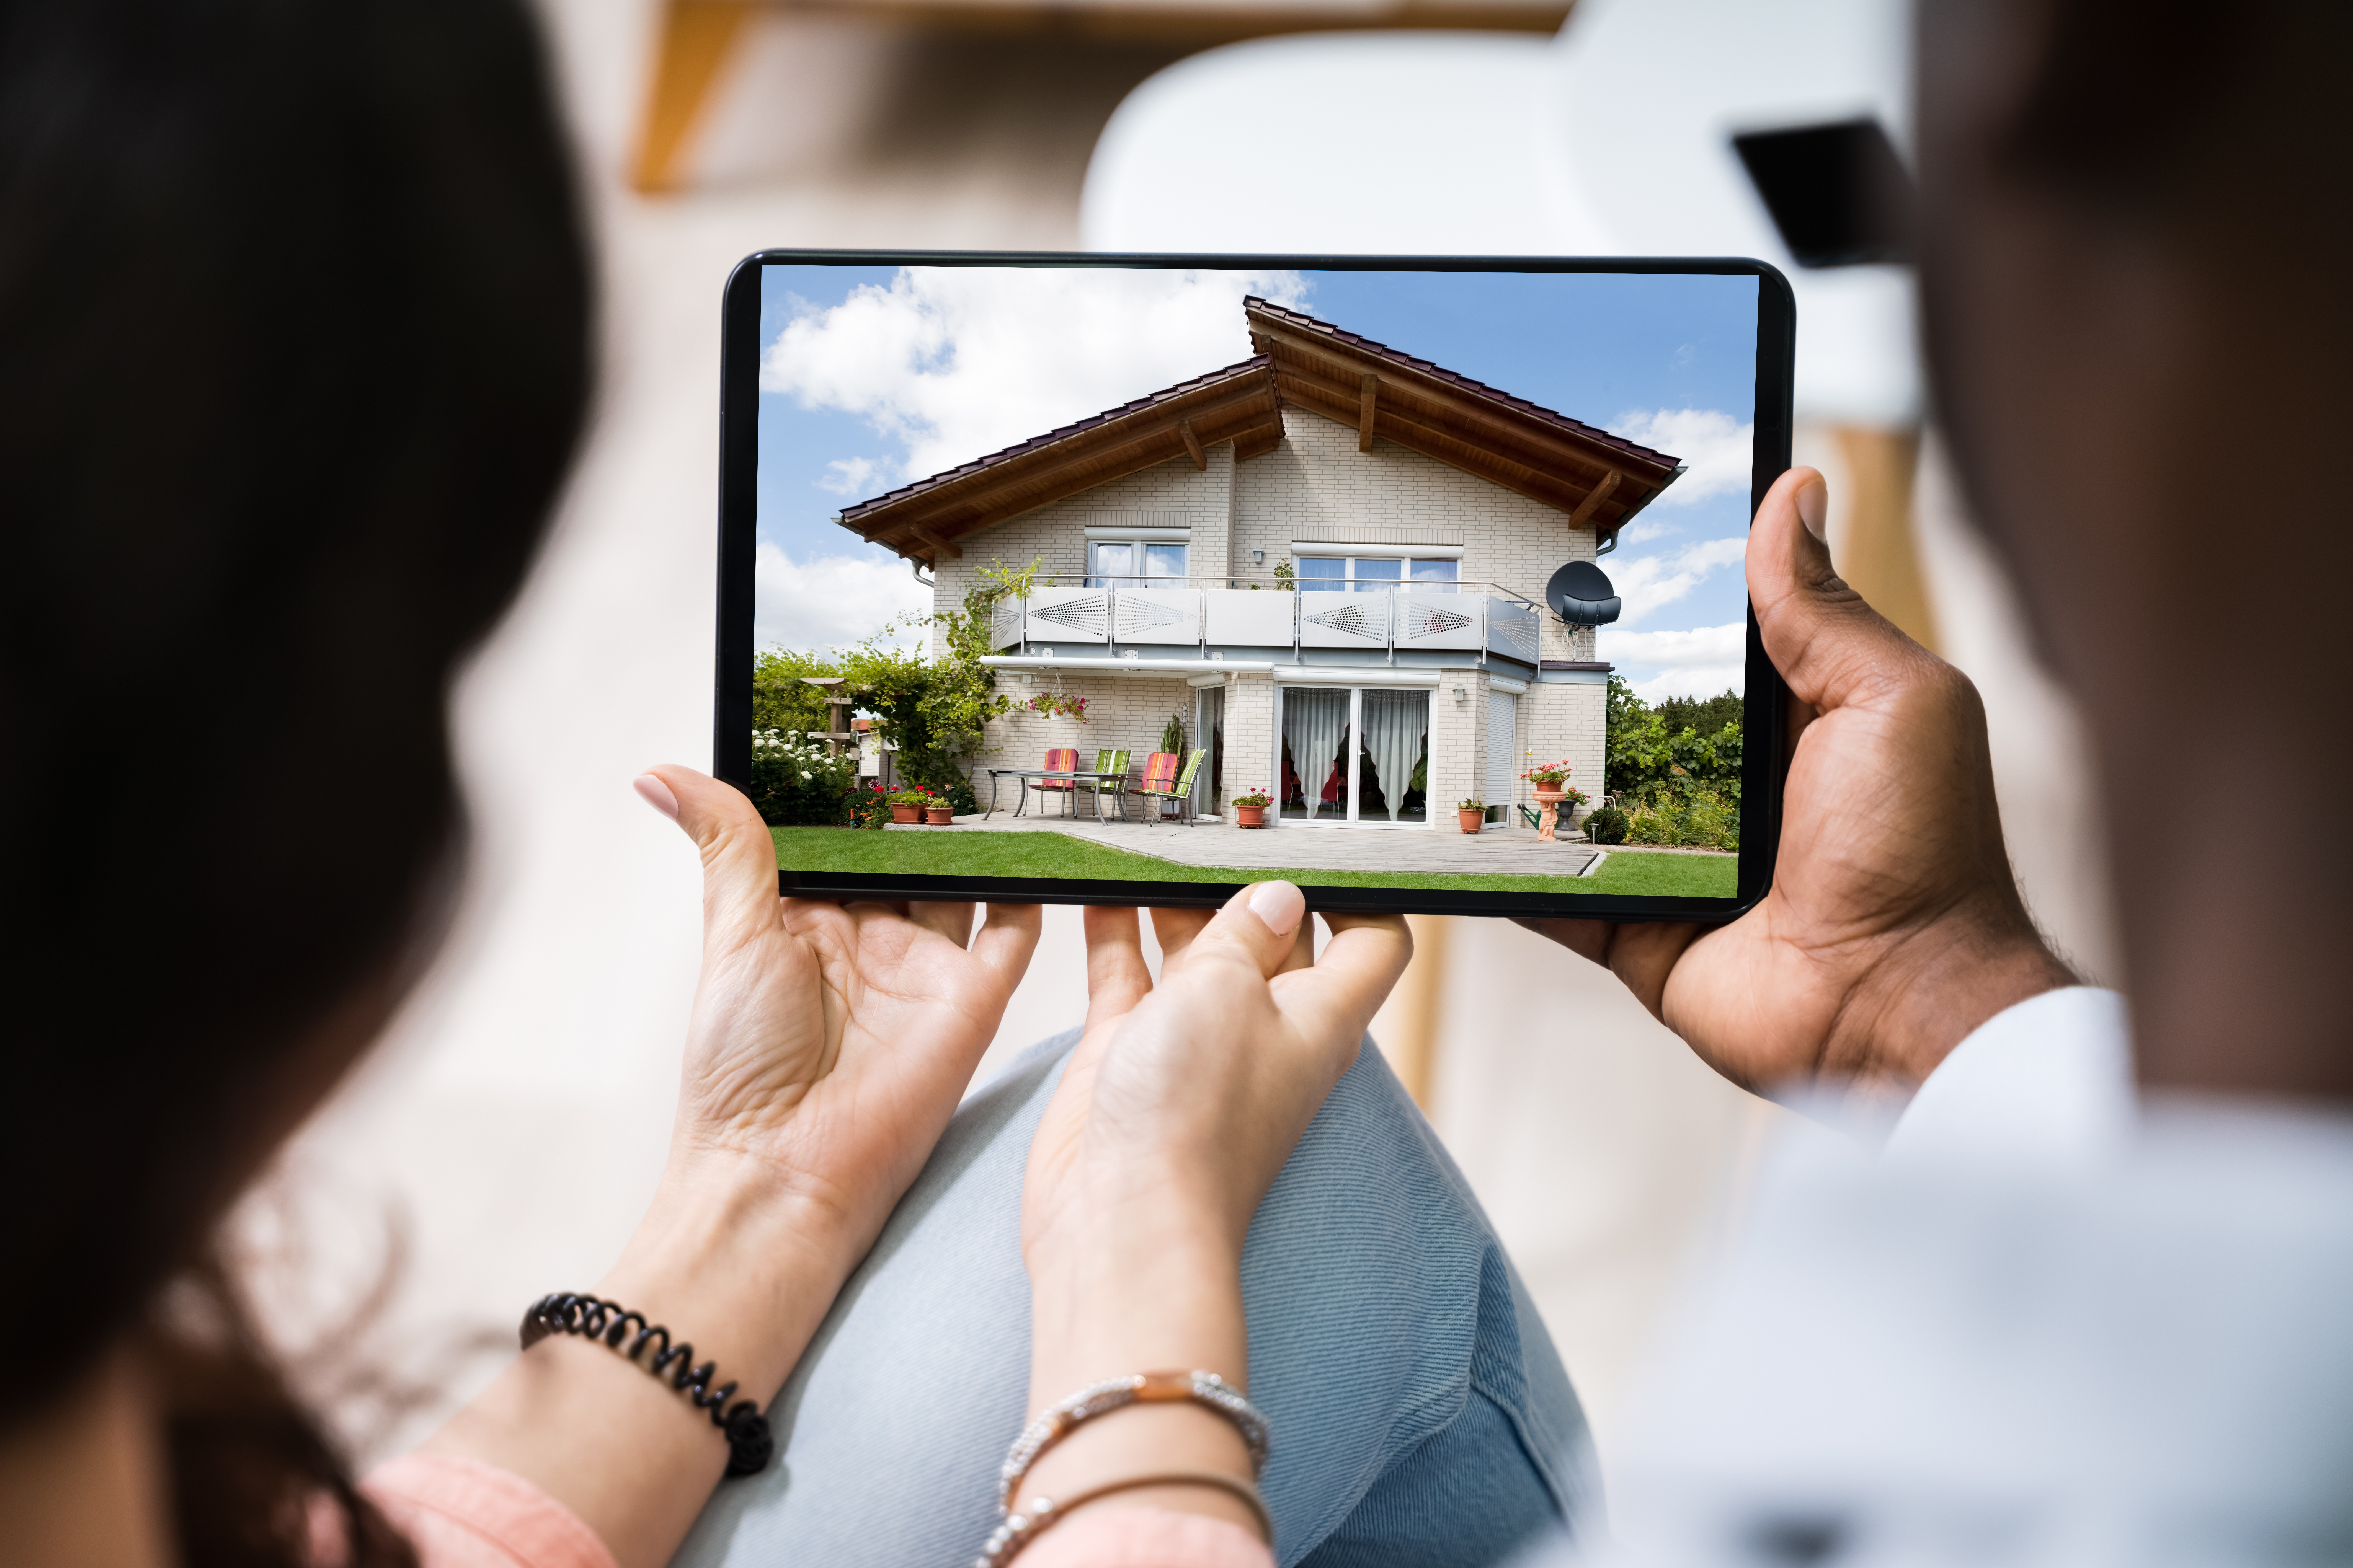 The Digital Revolution Is Permanently Changing the Real Estate Landscape